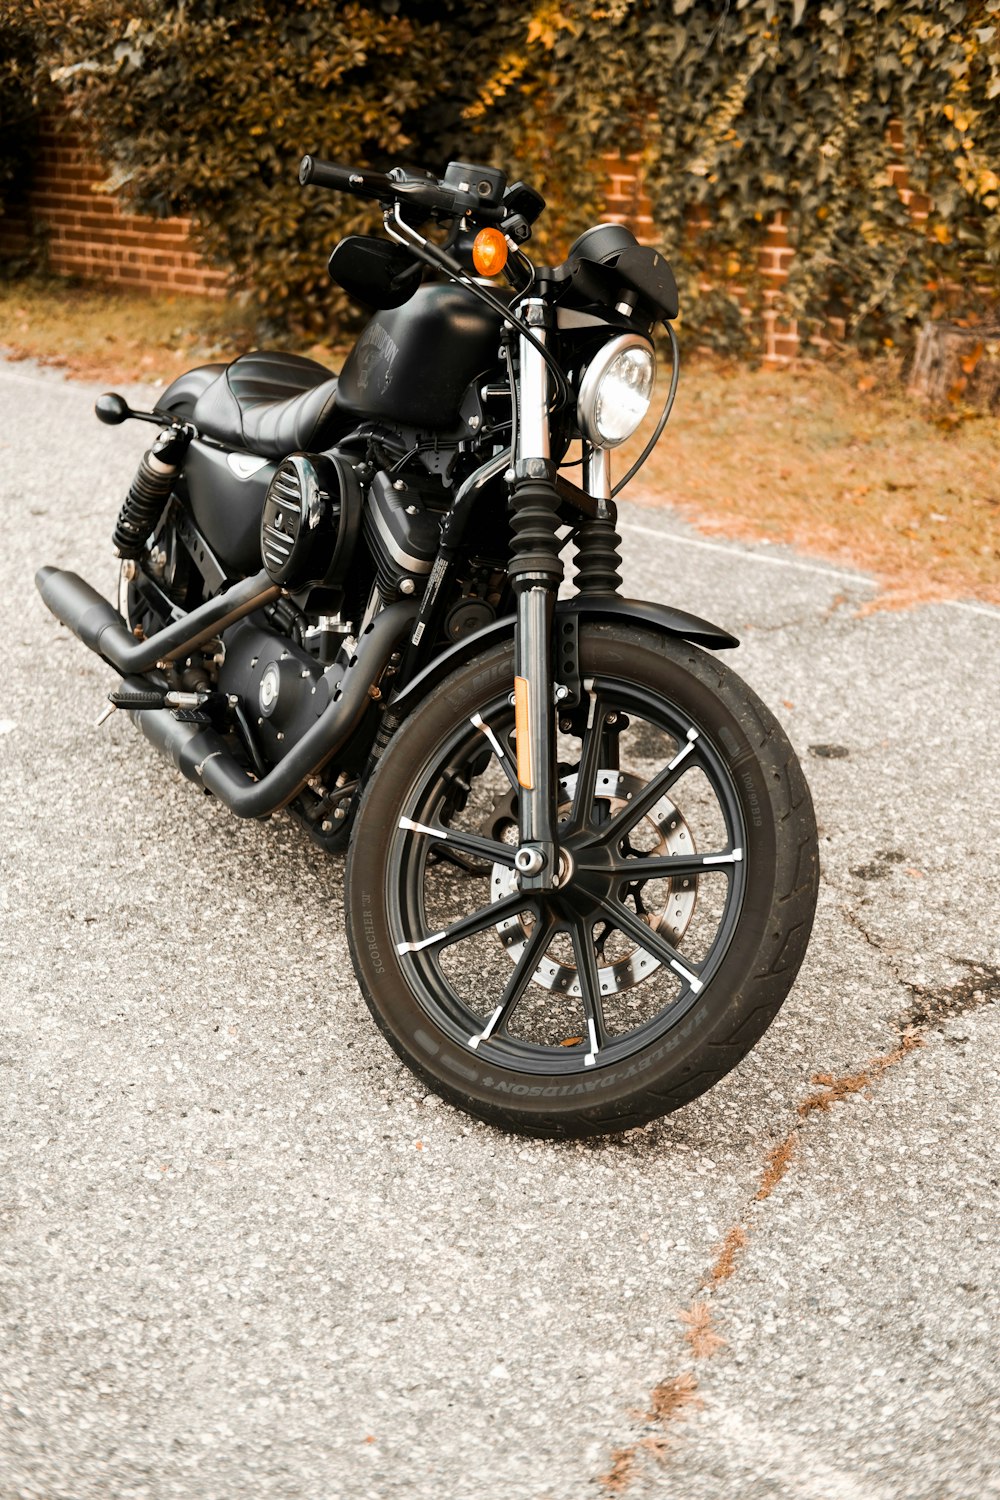 a black motorcycle parked on the side of the road